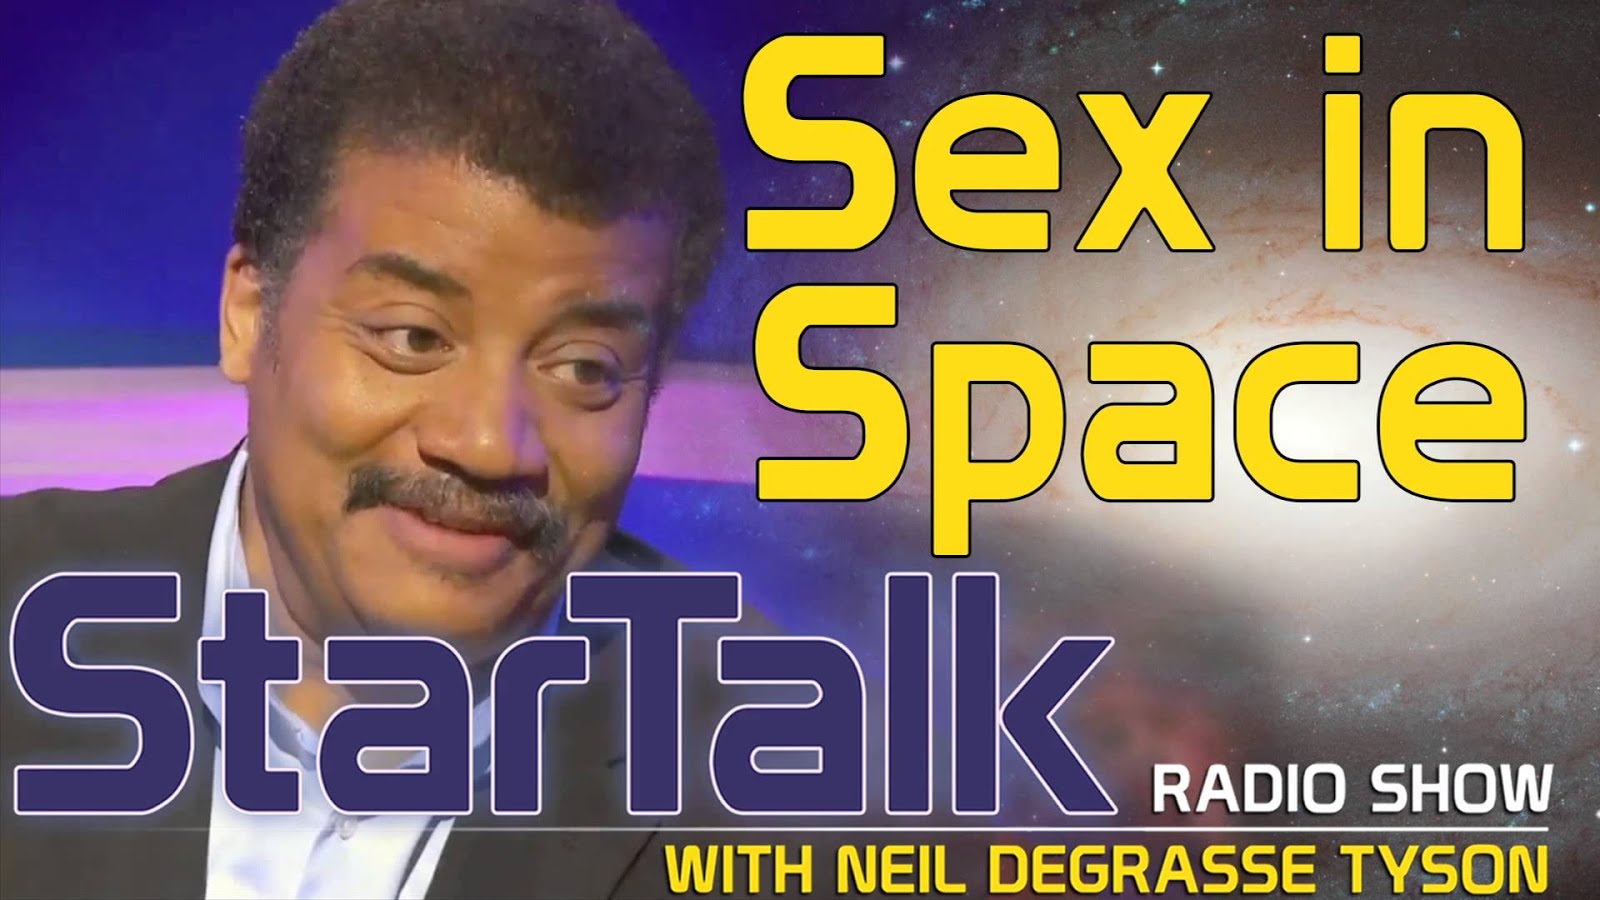 Sex in space sex with robots